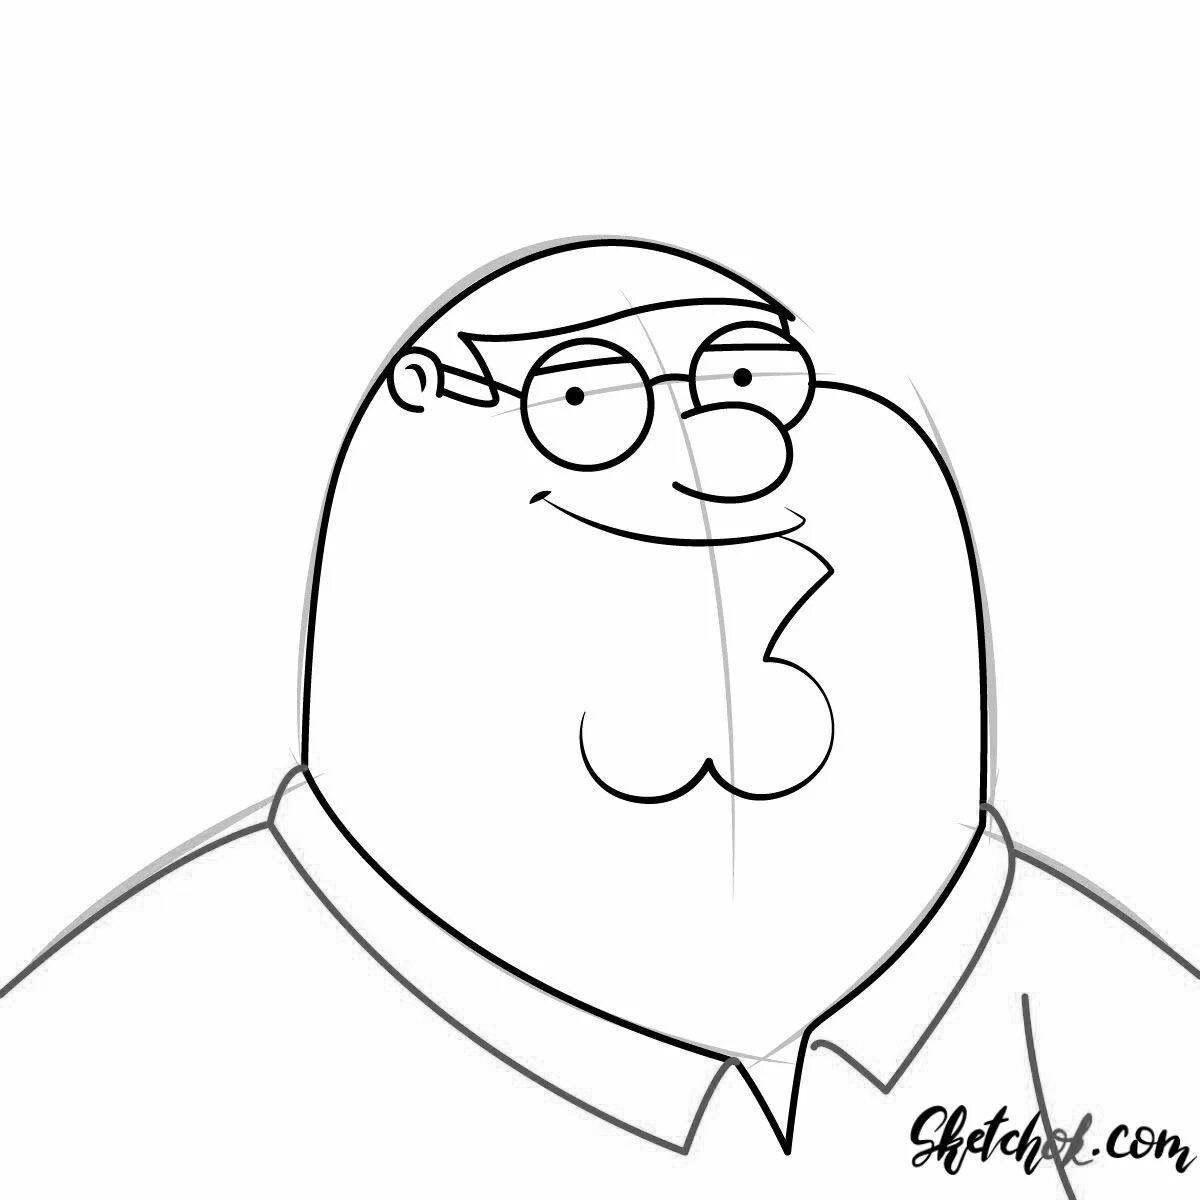 Peter griffin's amazing coloring page